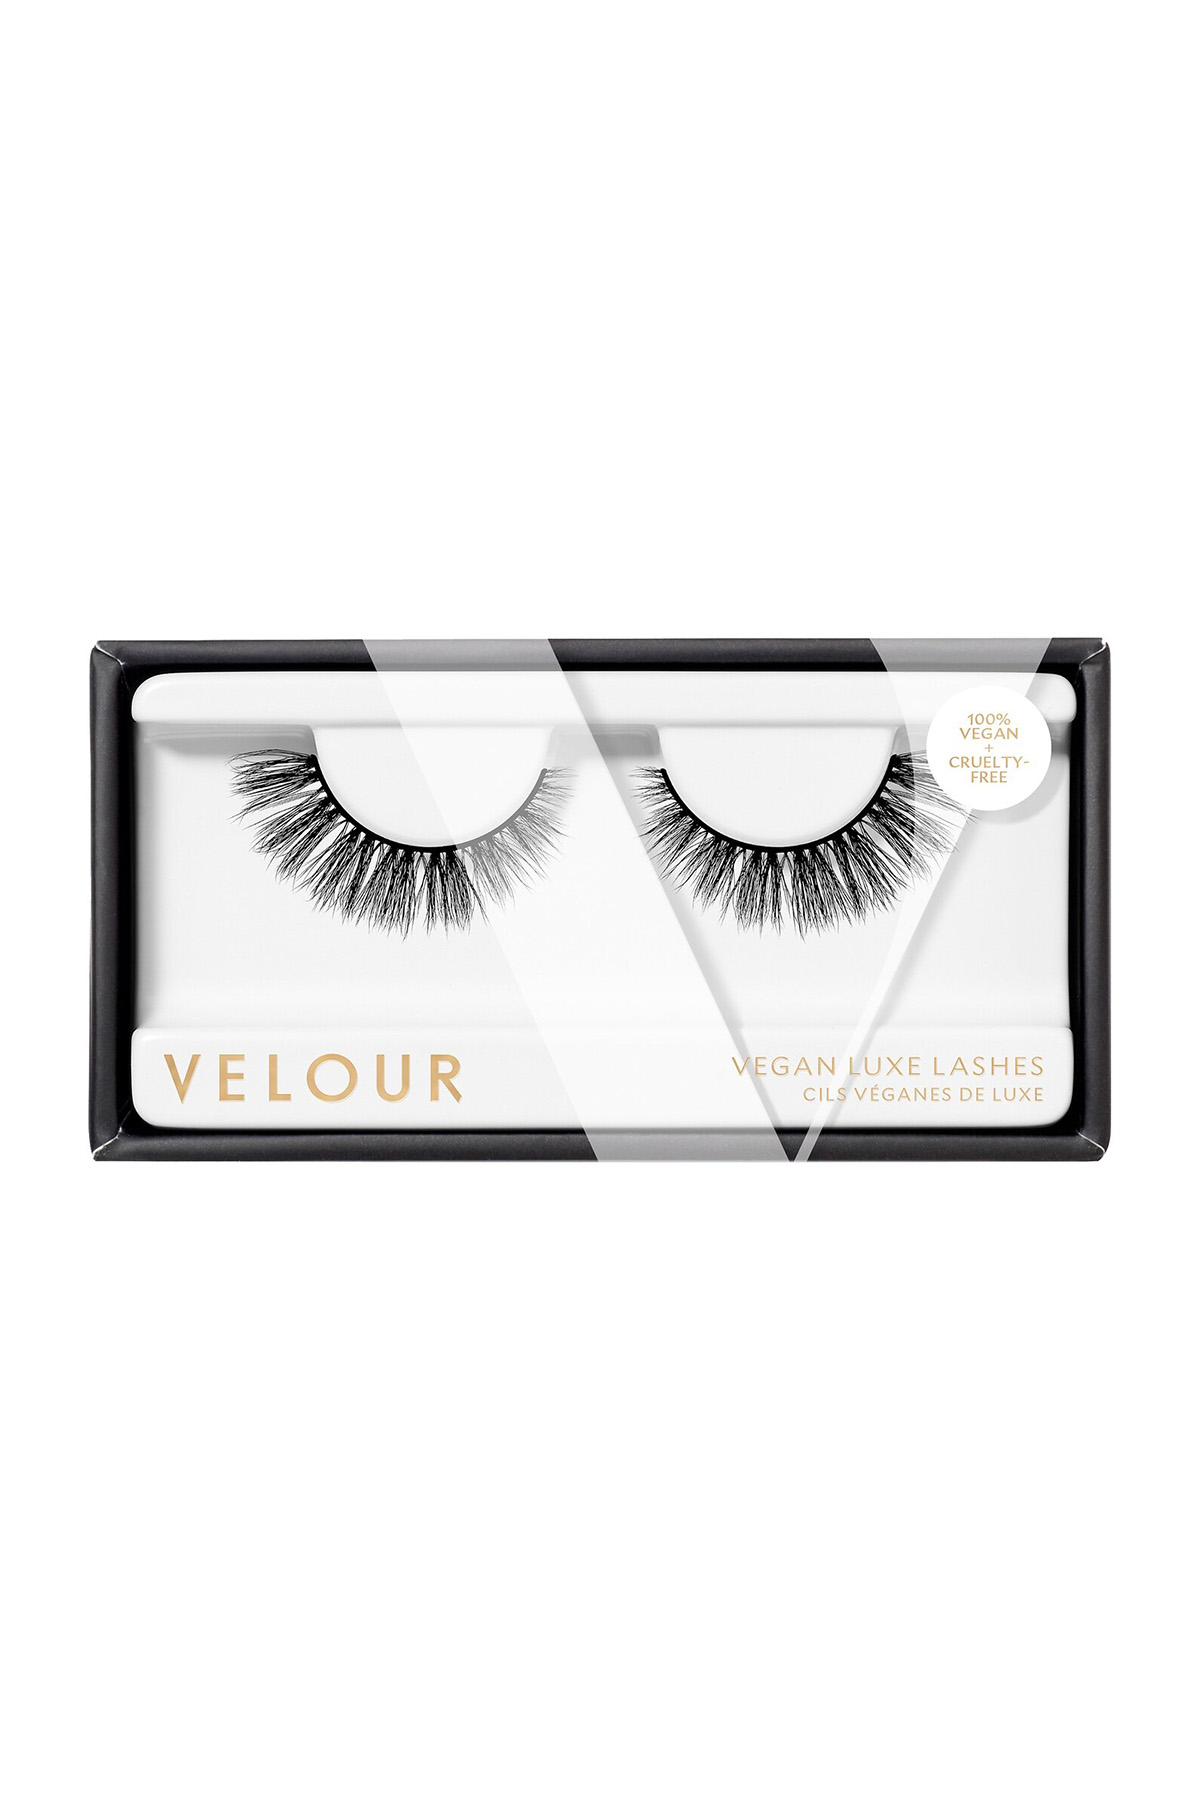 Velour Lashes Vegan Mink Luxe Lash Collection in Whispie Me Away